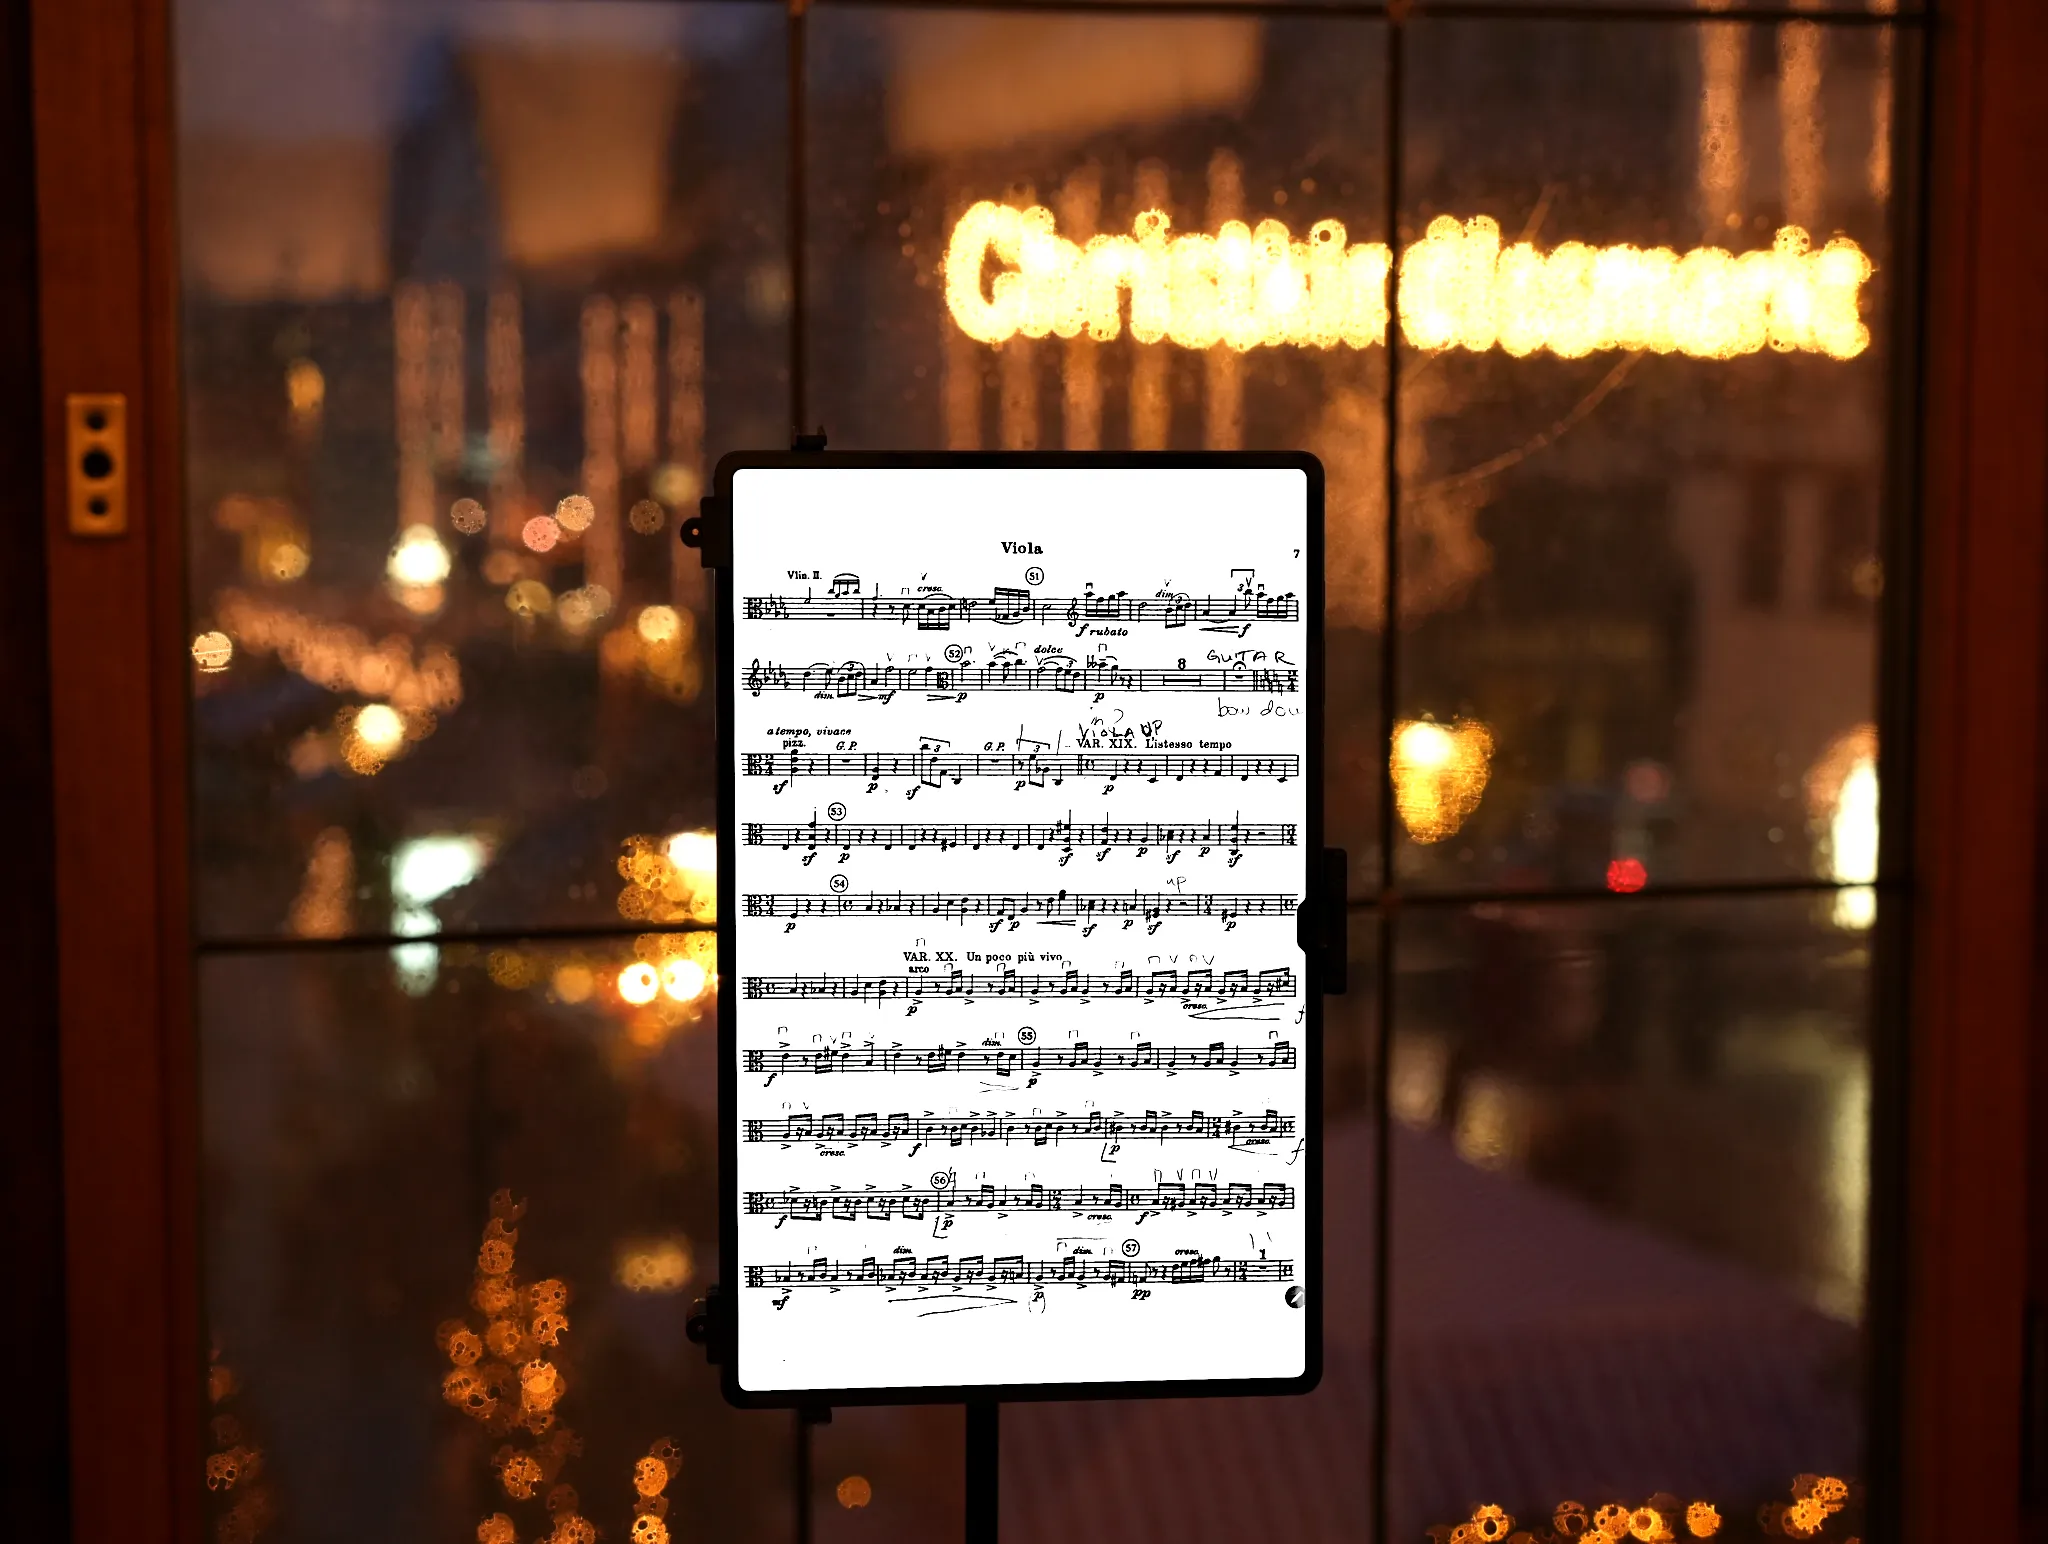 The Samsung Galaxy Tab S9 Ultra is the best Android tablet for reading sheet music, scores, lead sheets and songbooks.